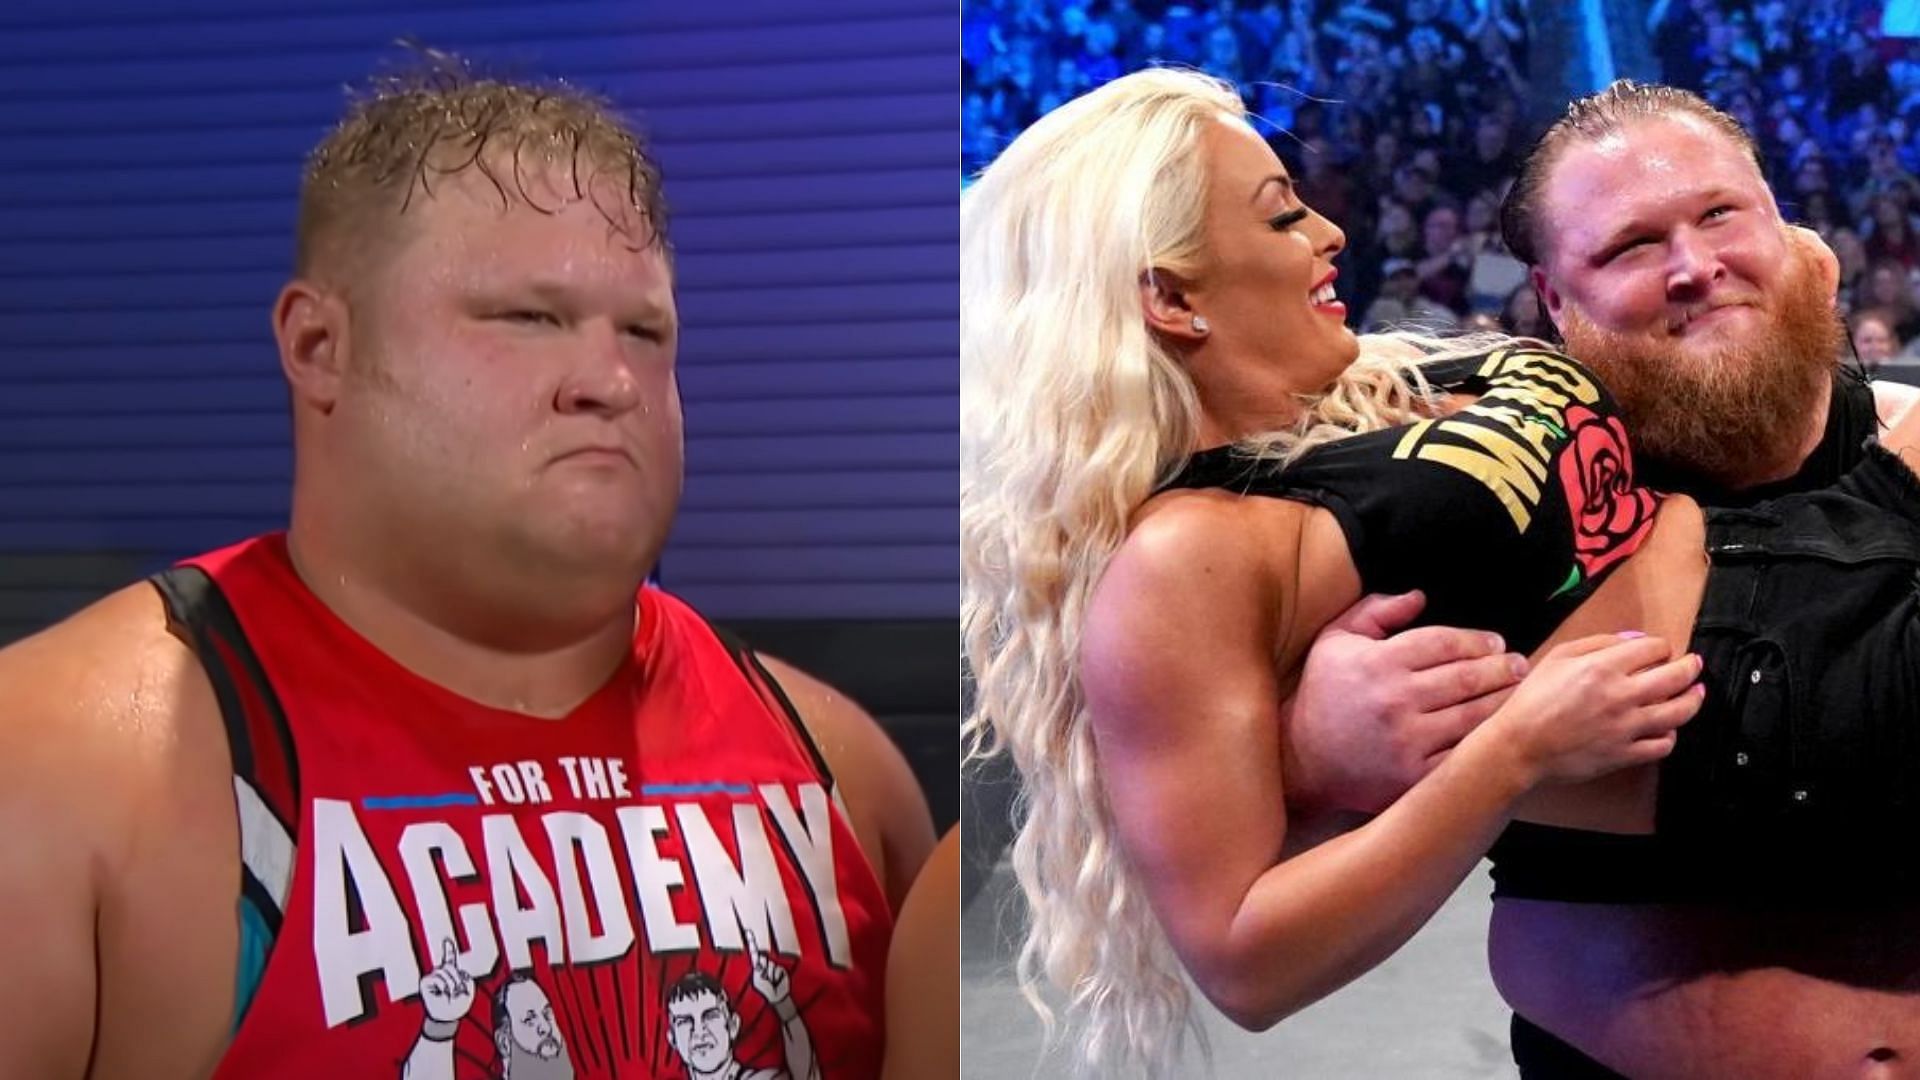 Mandy Rose and Otis were involved in a romance storyline in 2020.